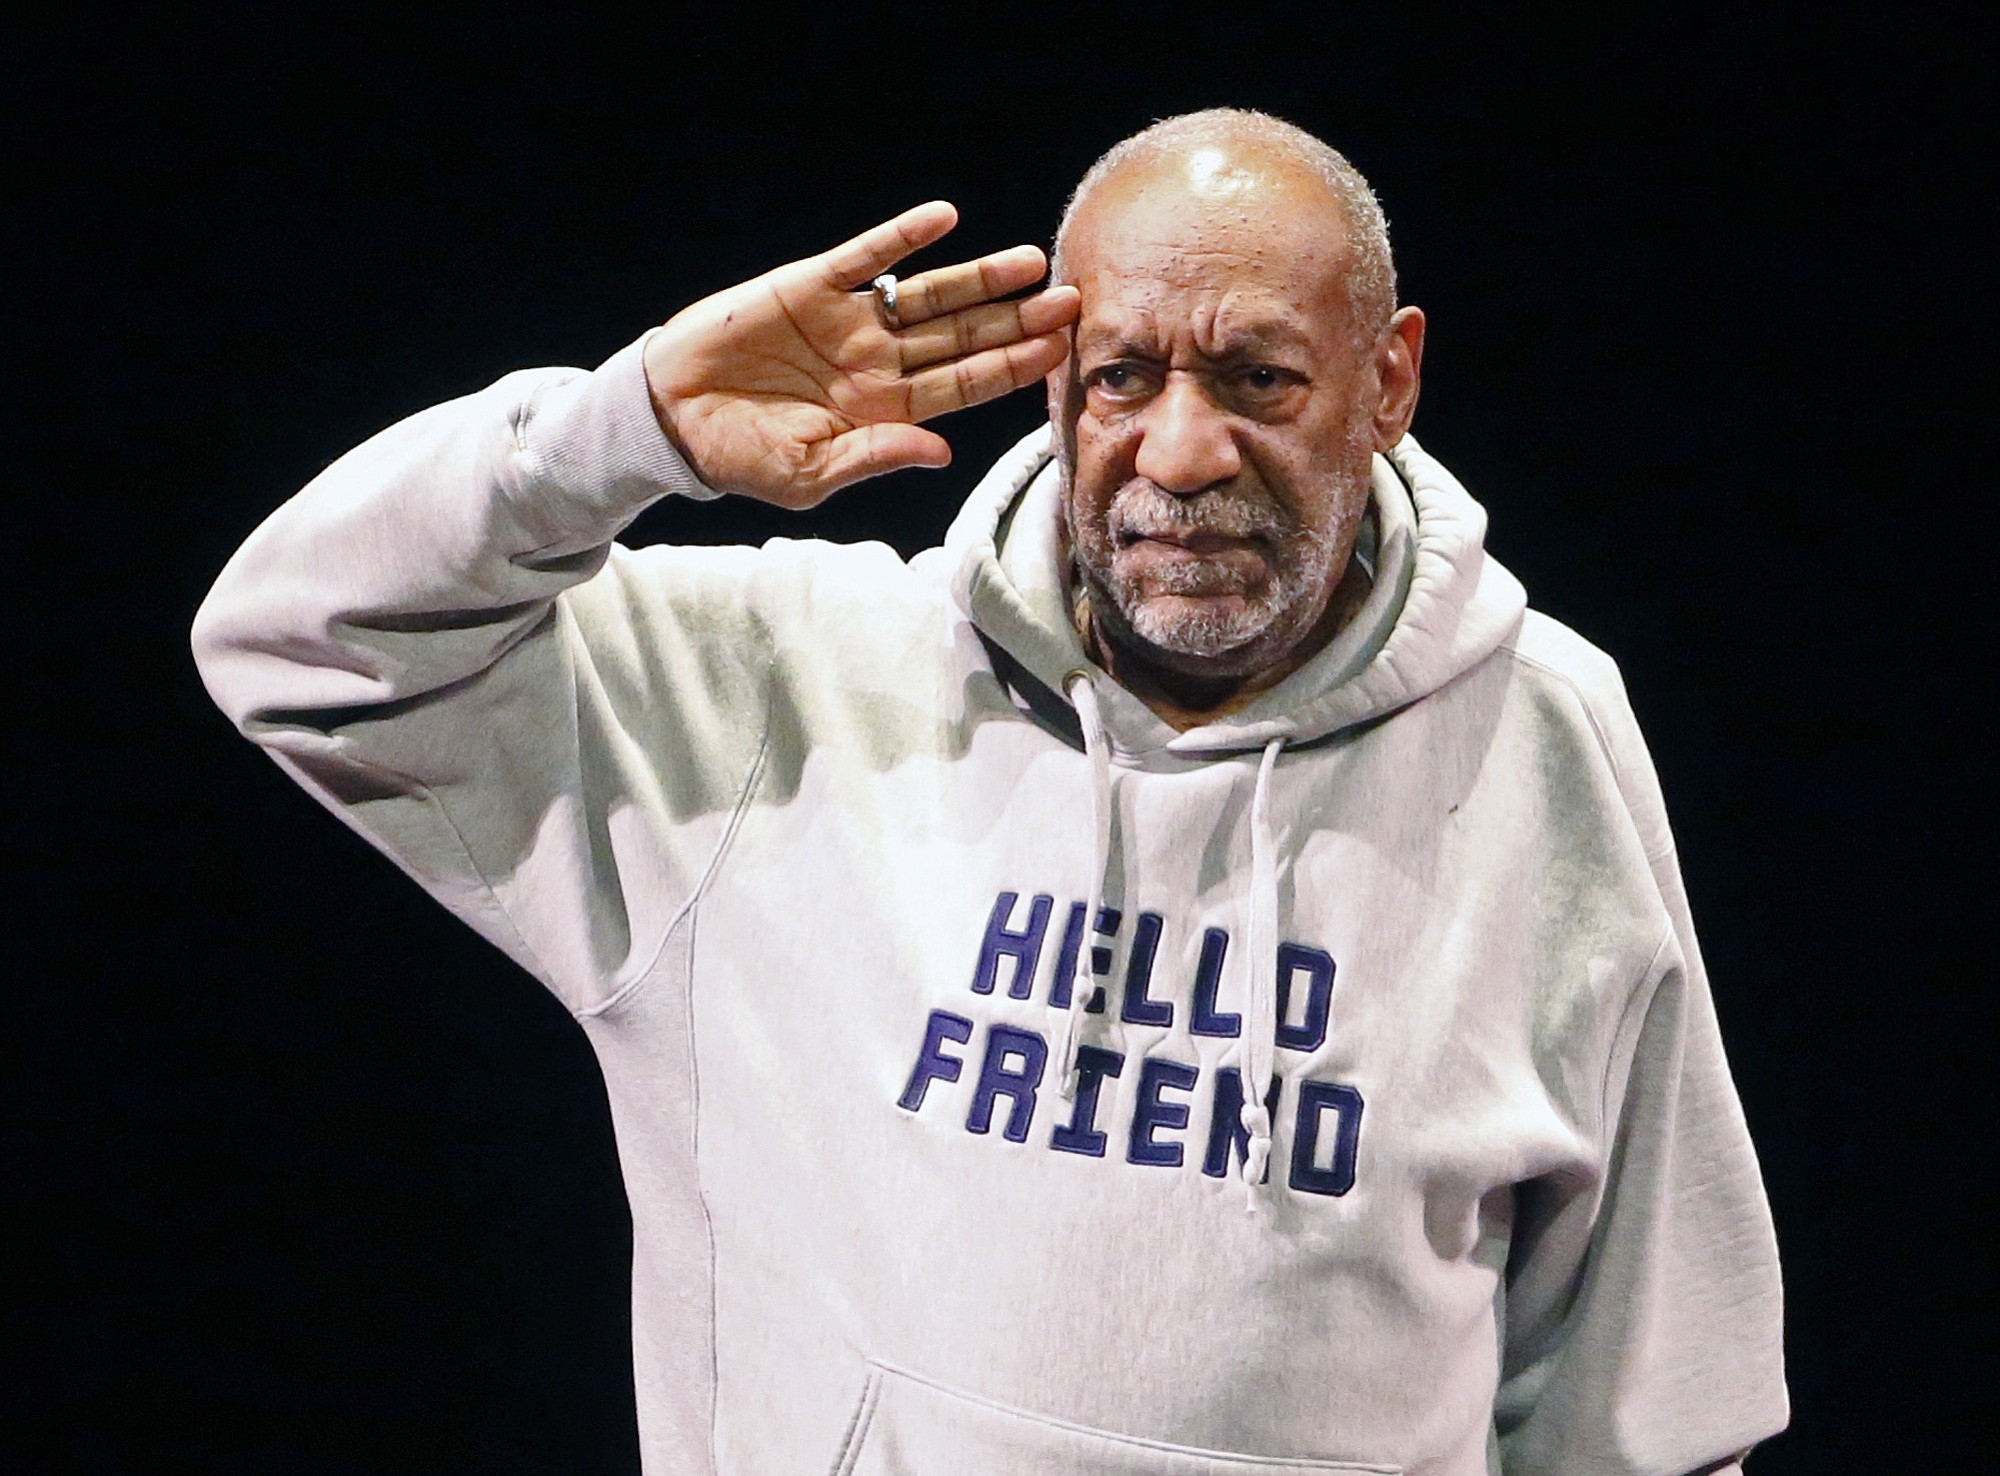 Comedian Bill Cosby salutes the crowd as he begins a performance at the Buell Theater in Denver.